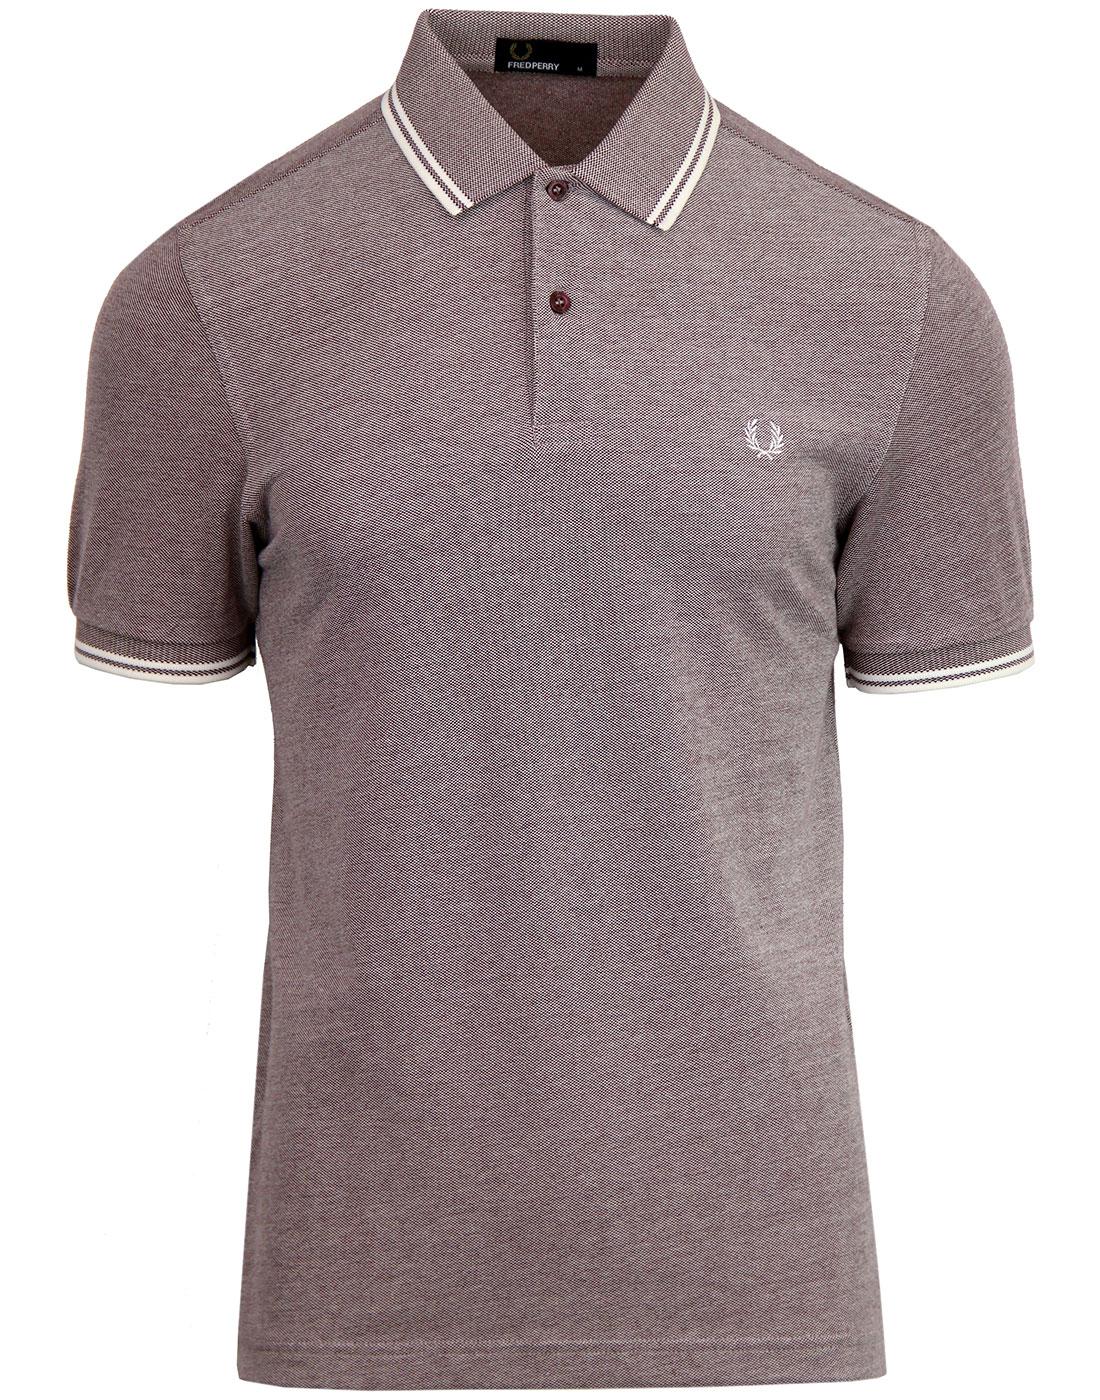 FRED PERRY M3600 Mod Twin Tipped Polo Shirt - MM